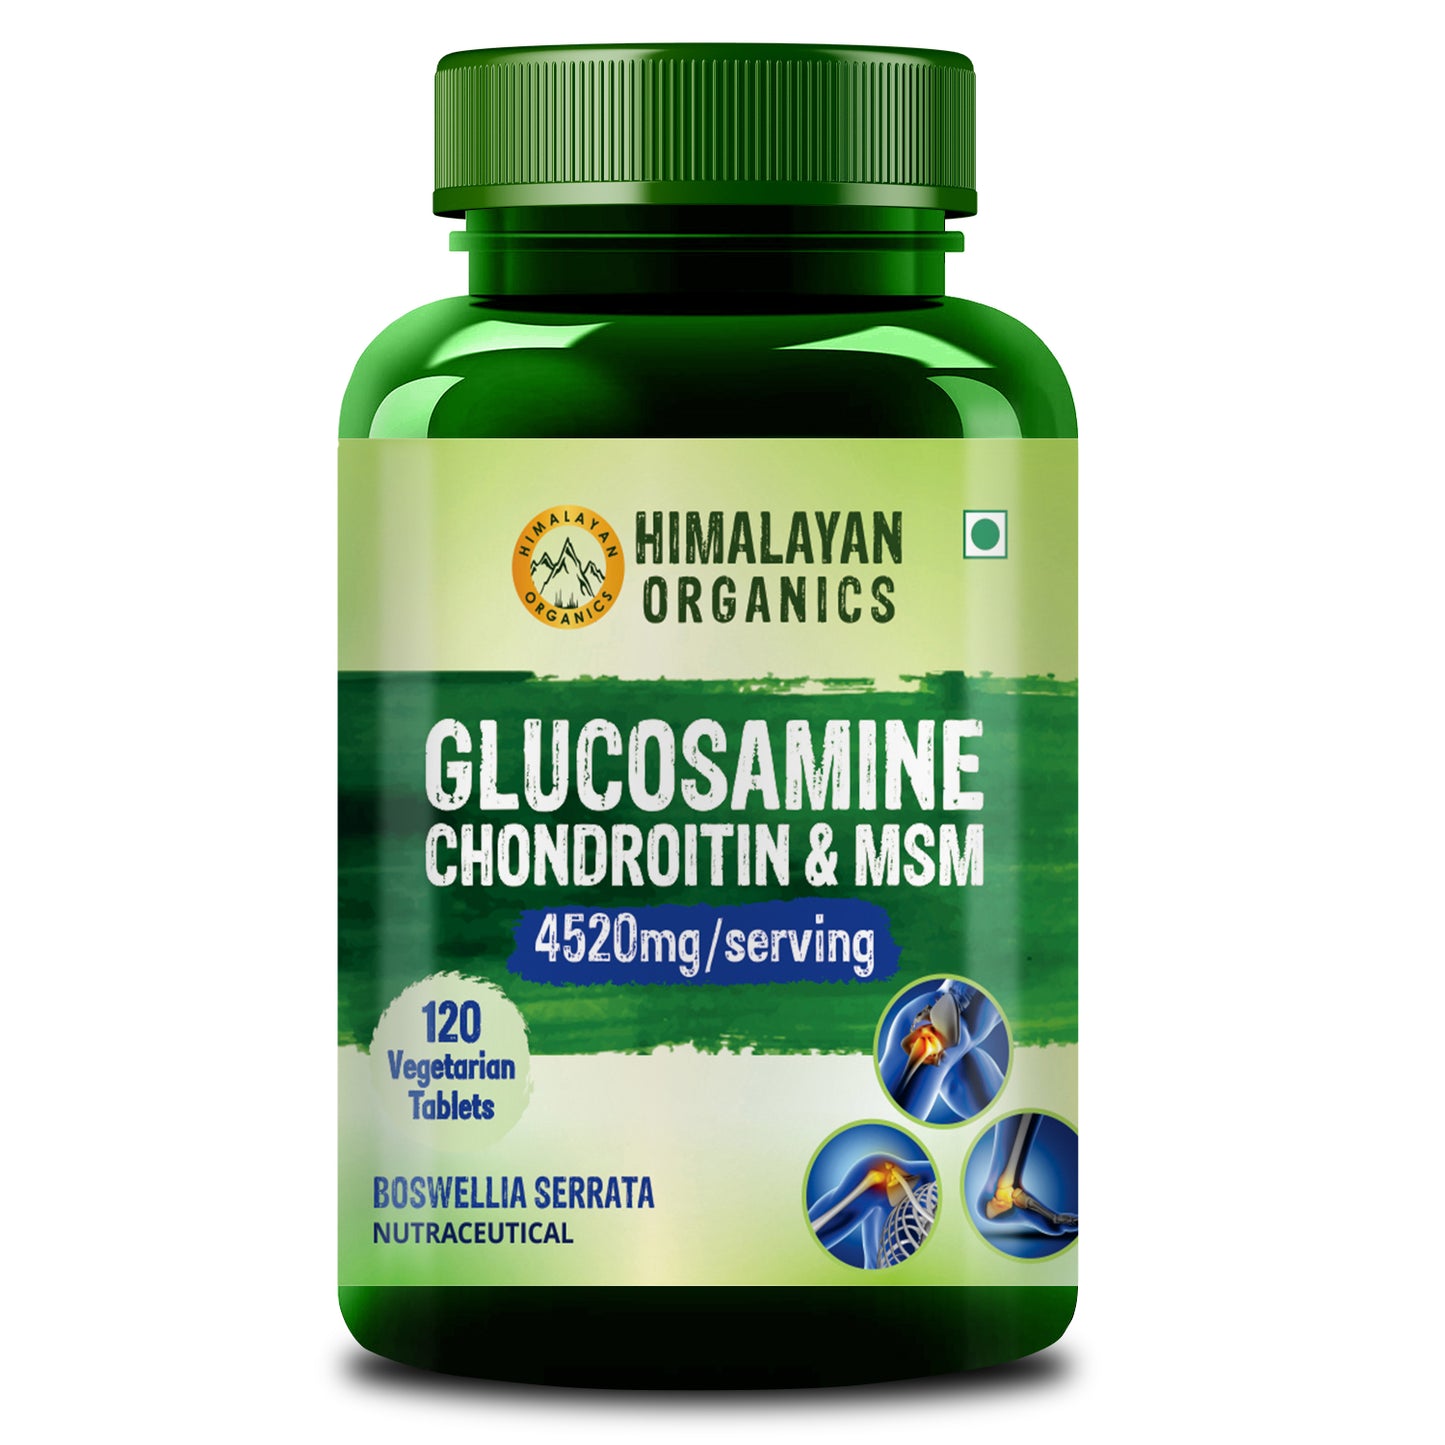 Himalayan Organics Glucosamine Chondroitin MSM | For Bone, Joint & Cartilage Support | 120 Tablet